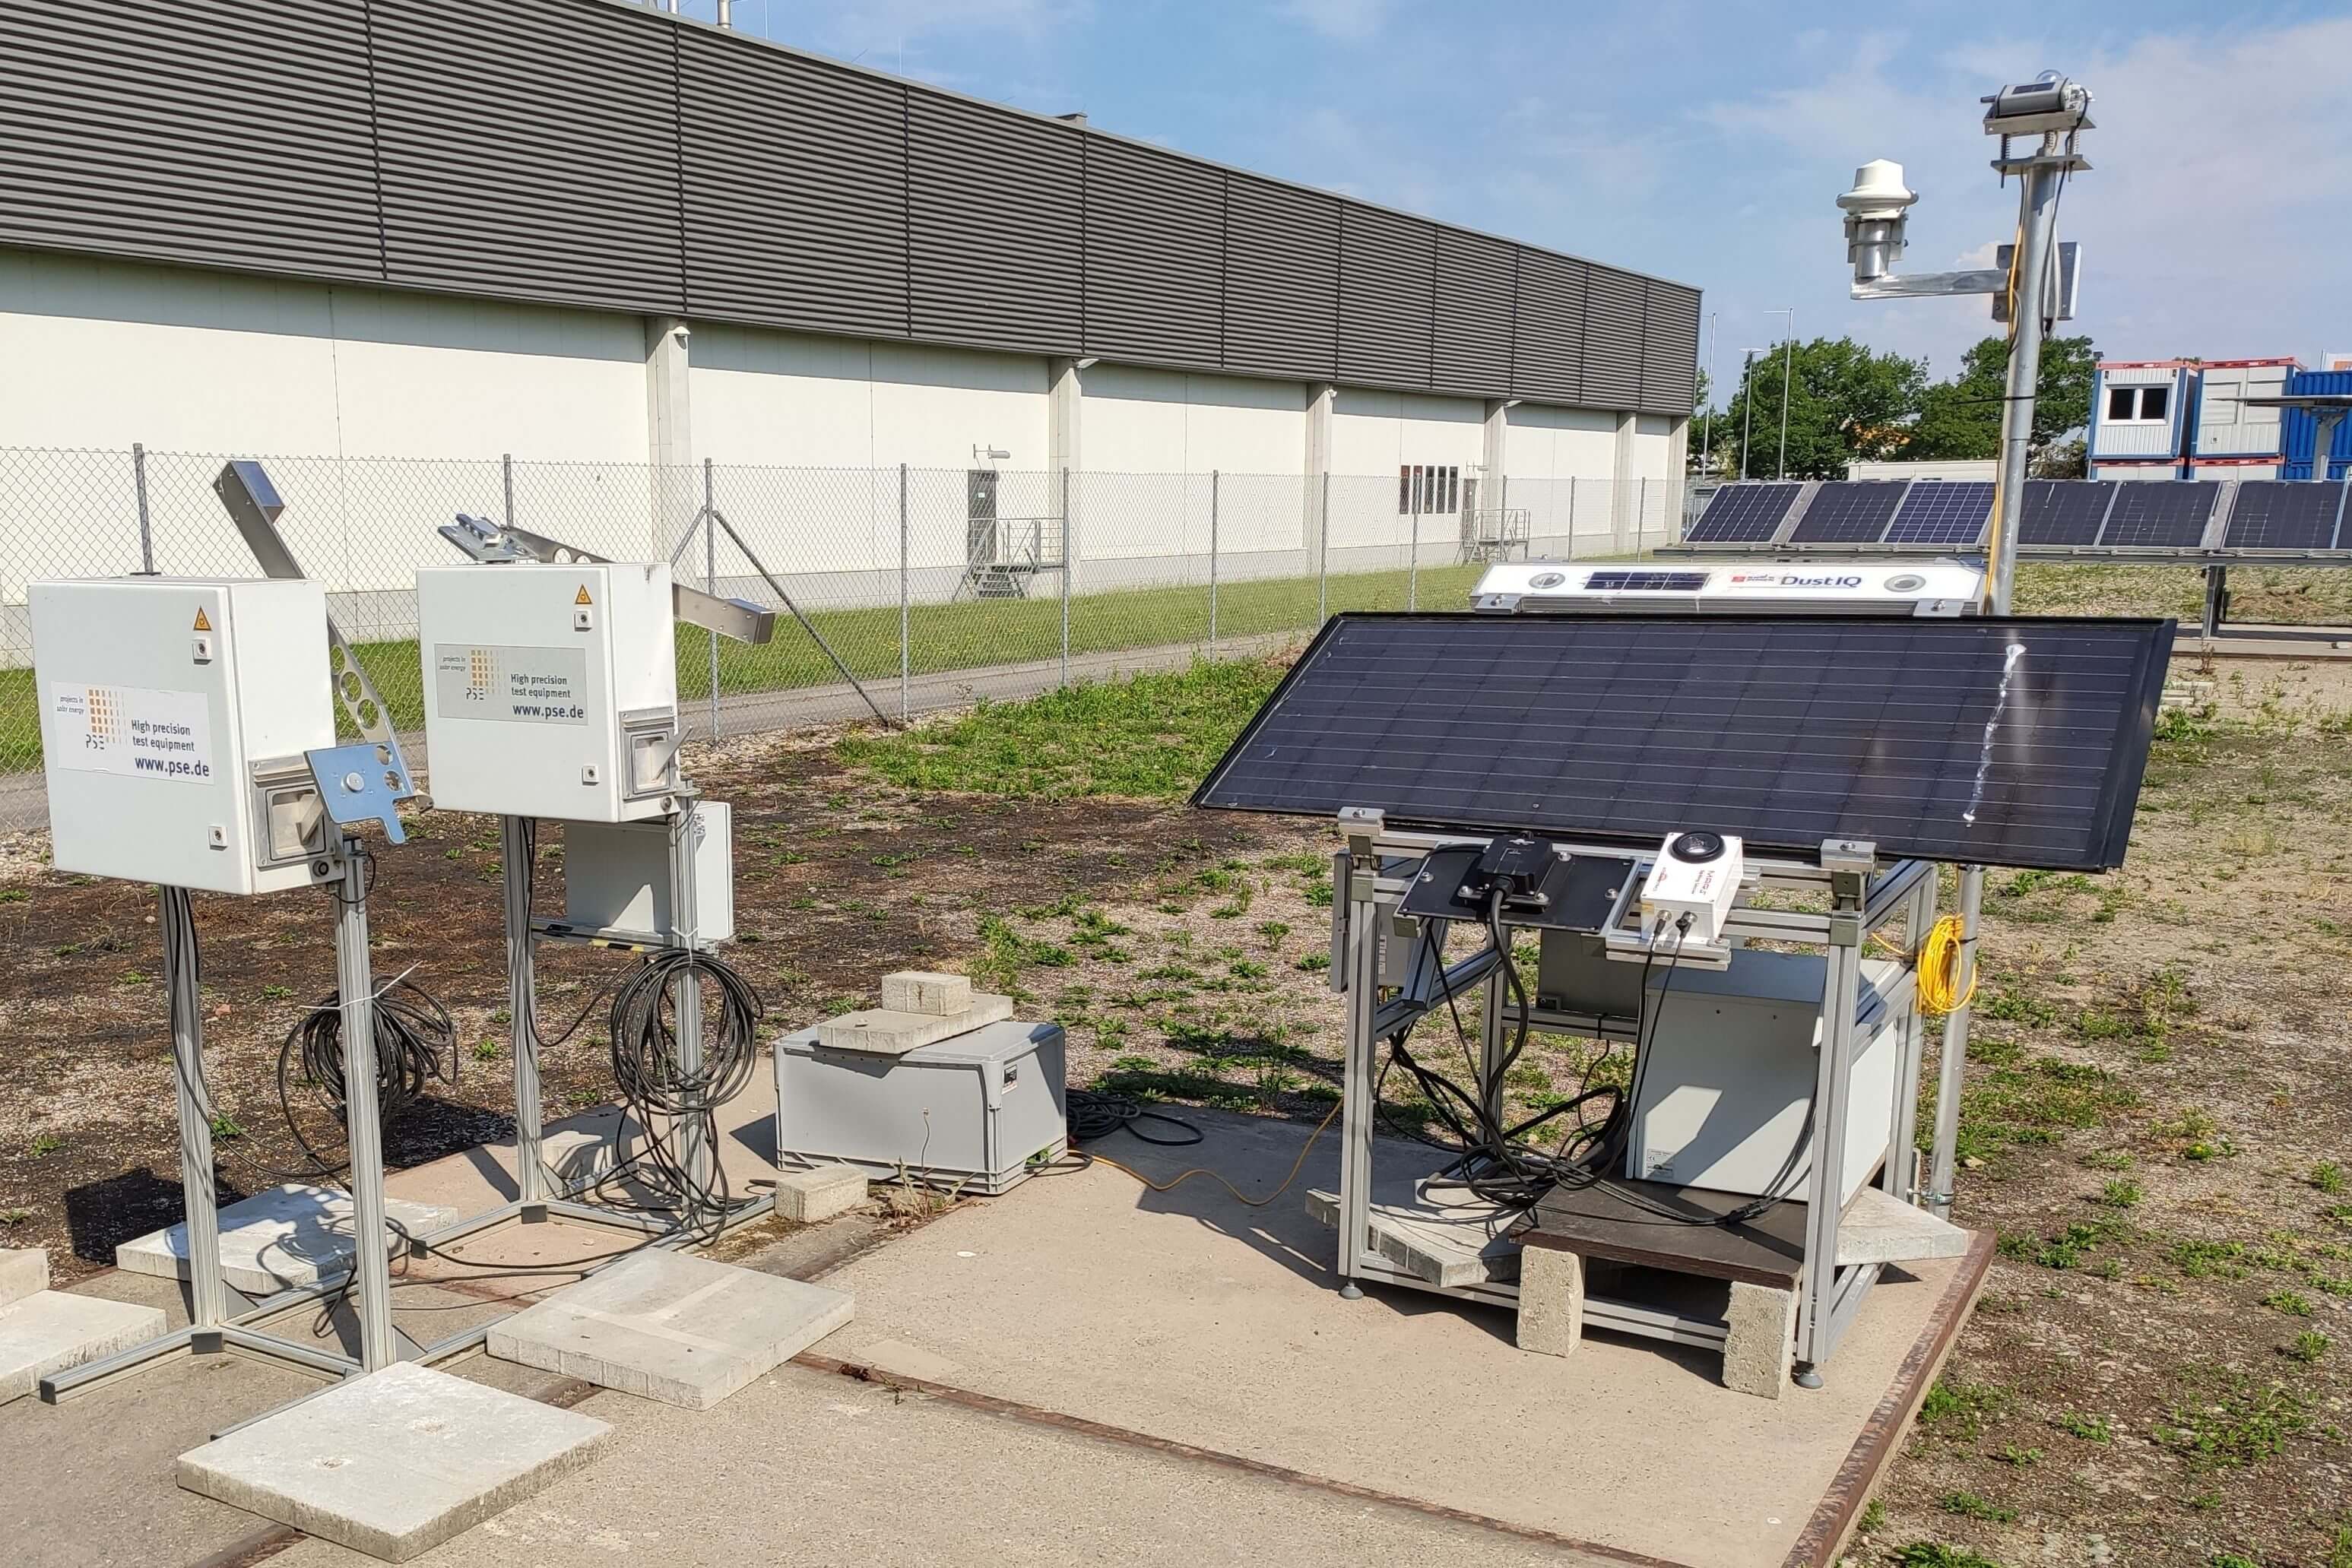 AVUS devices (left) at the Fraunhofer ISE test site in Freiburg-Hochdorf. Comparative measurement with PV-Soiling measuring devices are conducted